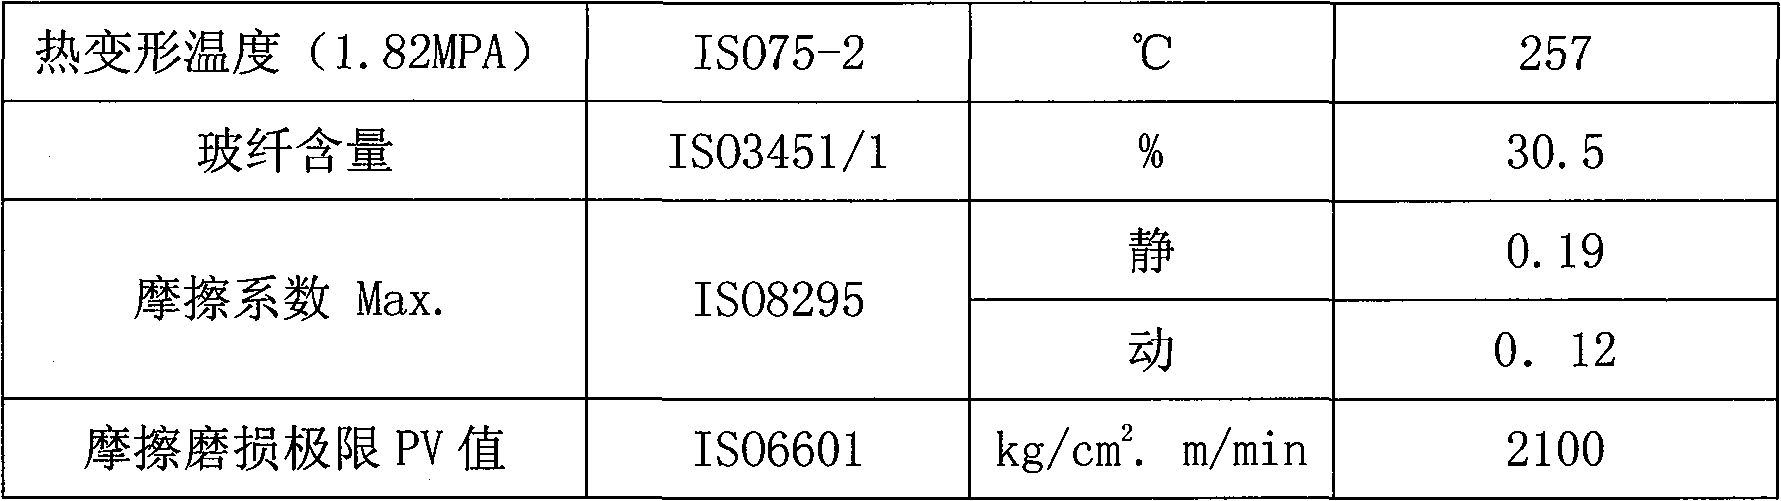 High-wearing high-rigidity reinforced nylon 66 complexes and method for making same